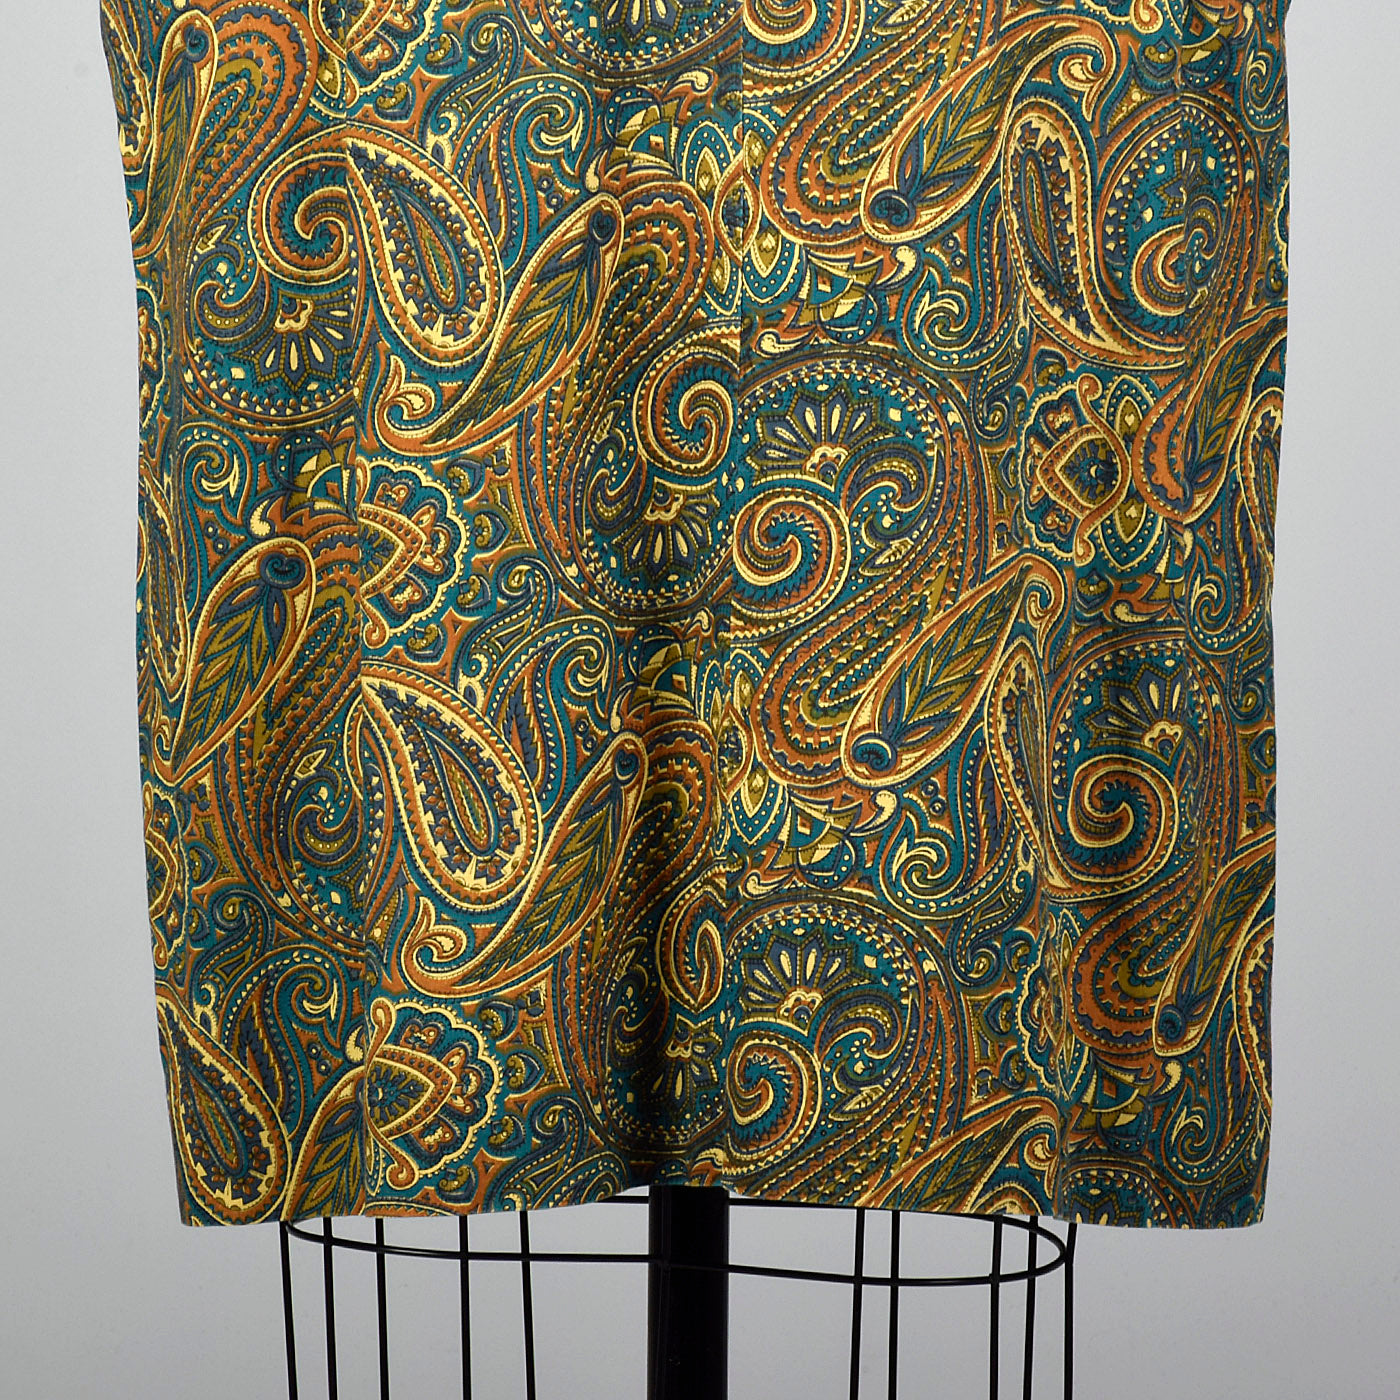 1950s Cotton Day Dress in Paisley Print